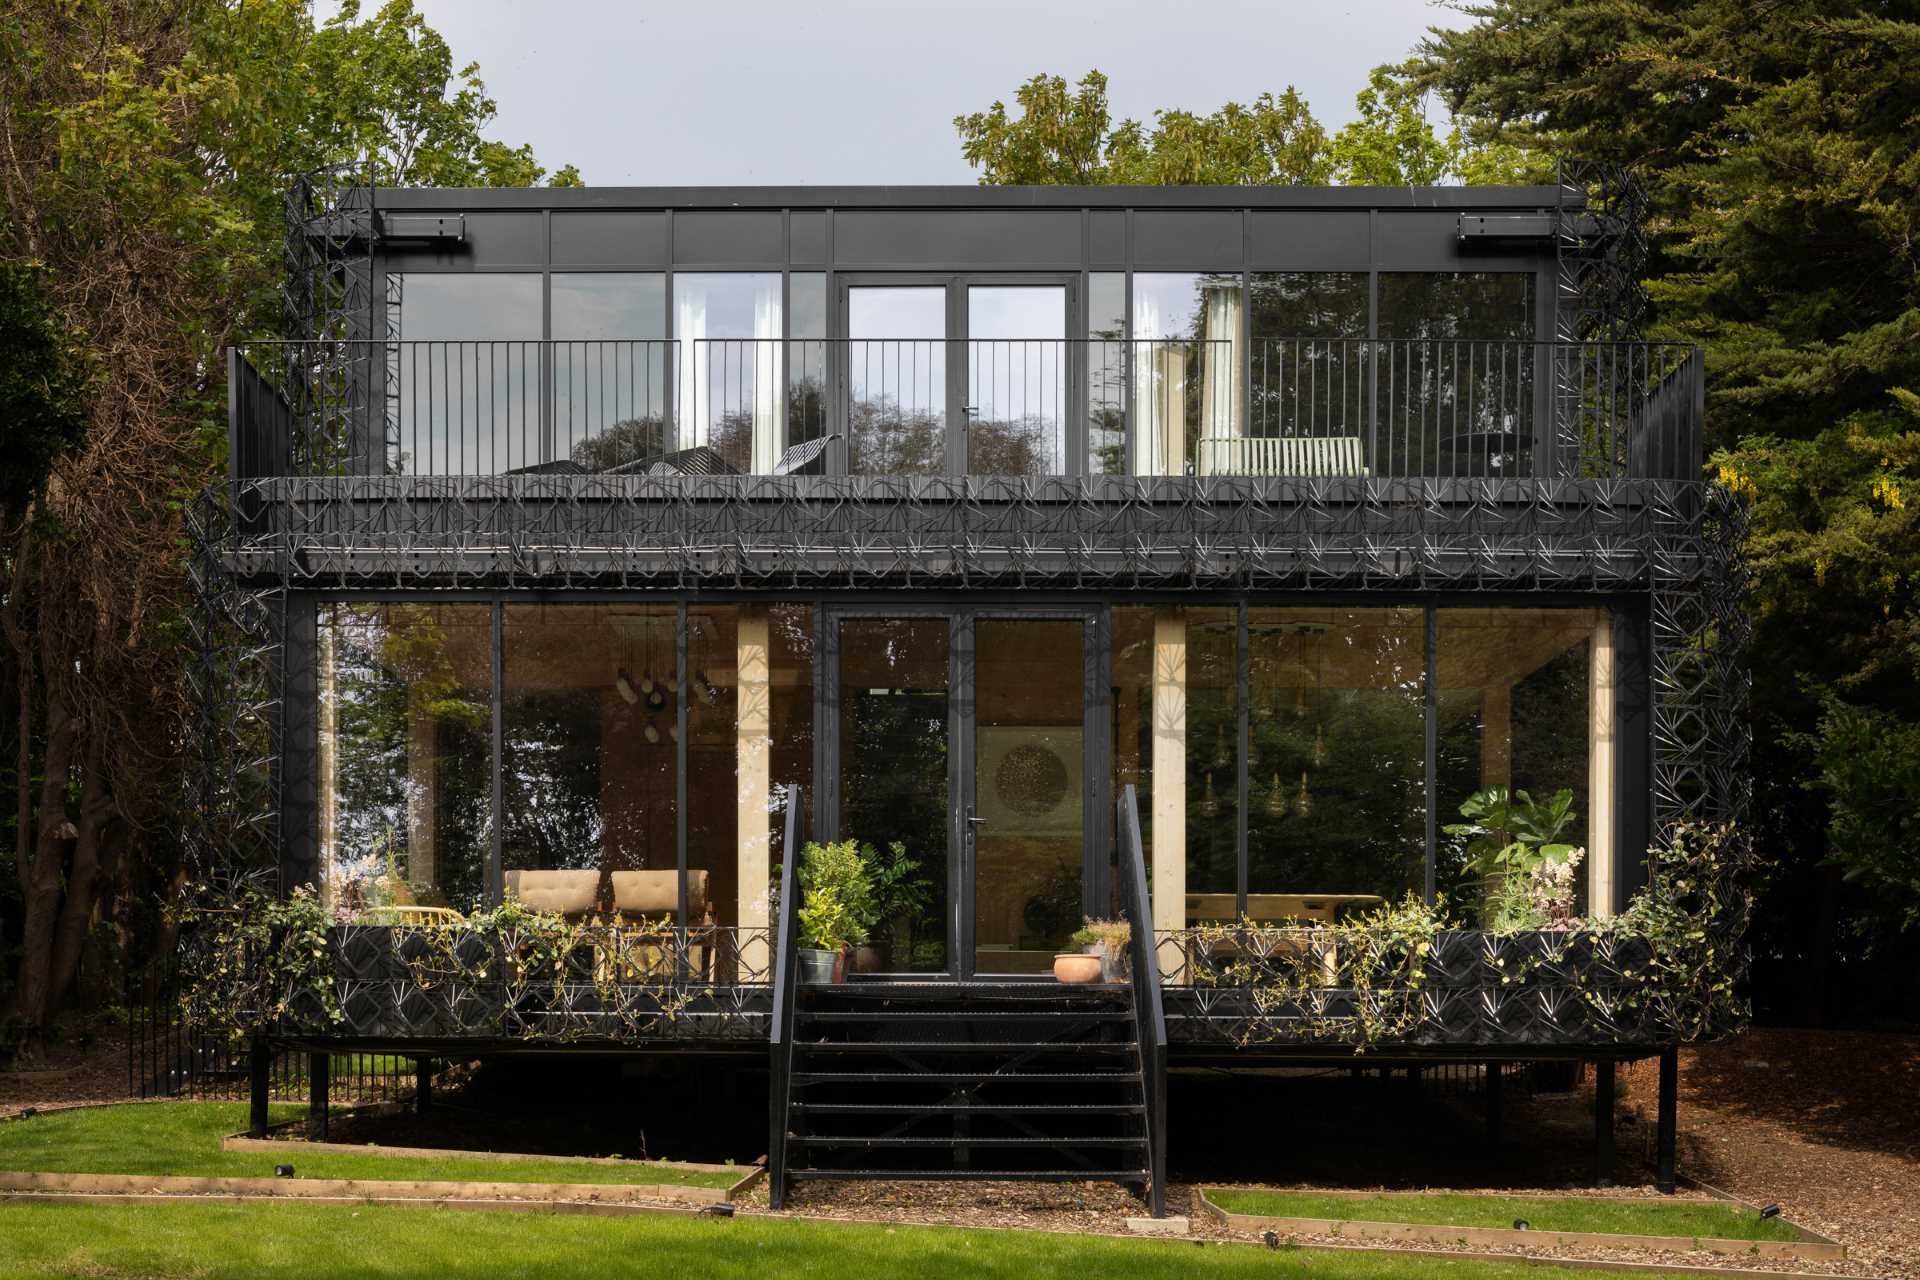 A modern black house with a sculptural facade designed to let plants grow on the exterior over time.